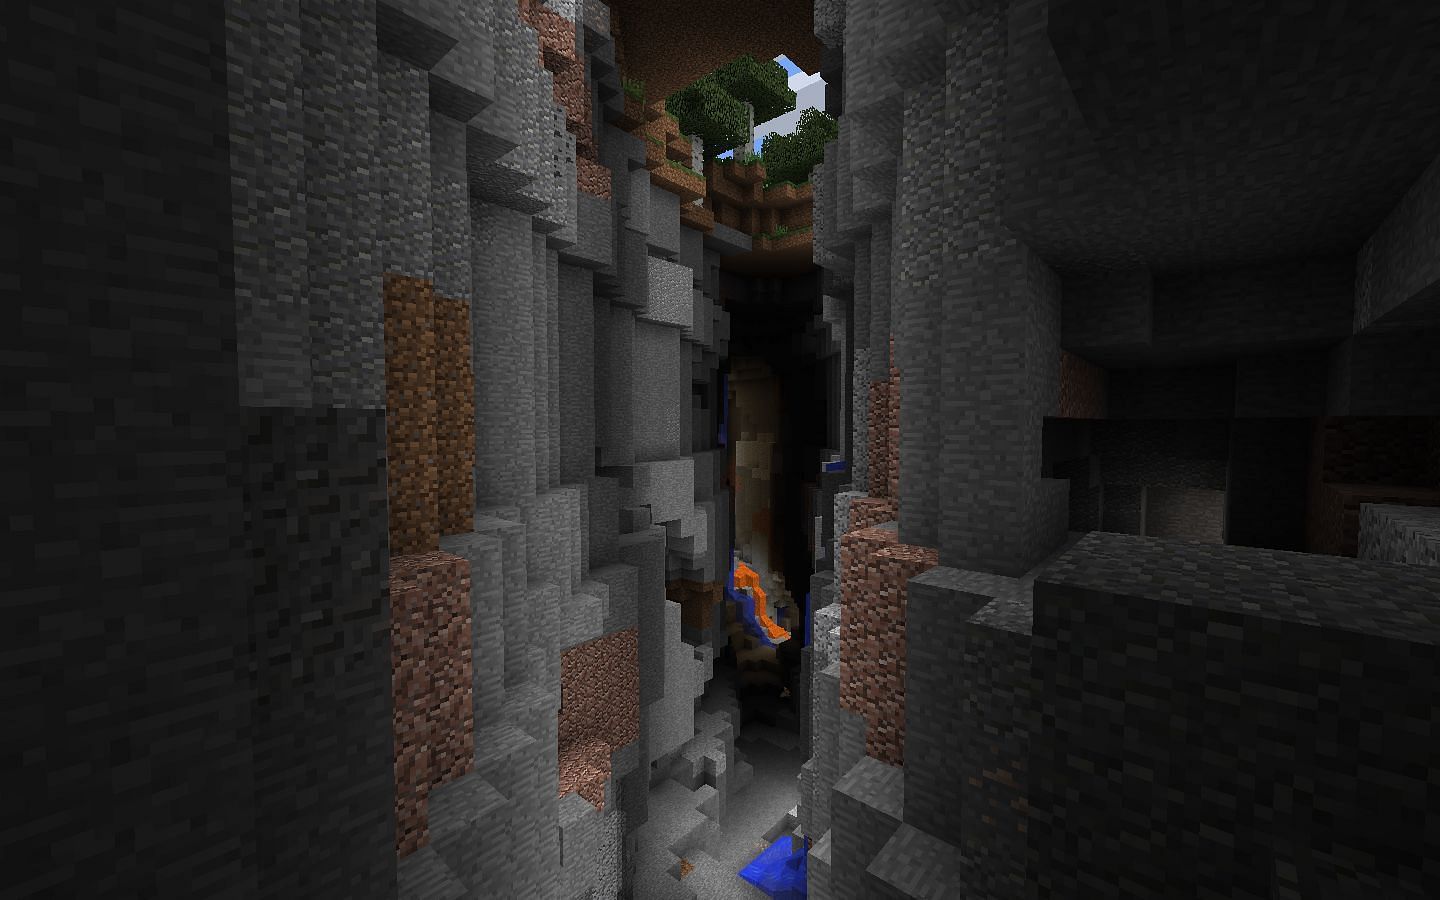 An example of a surface ravine. (Image via Minecraft)